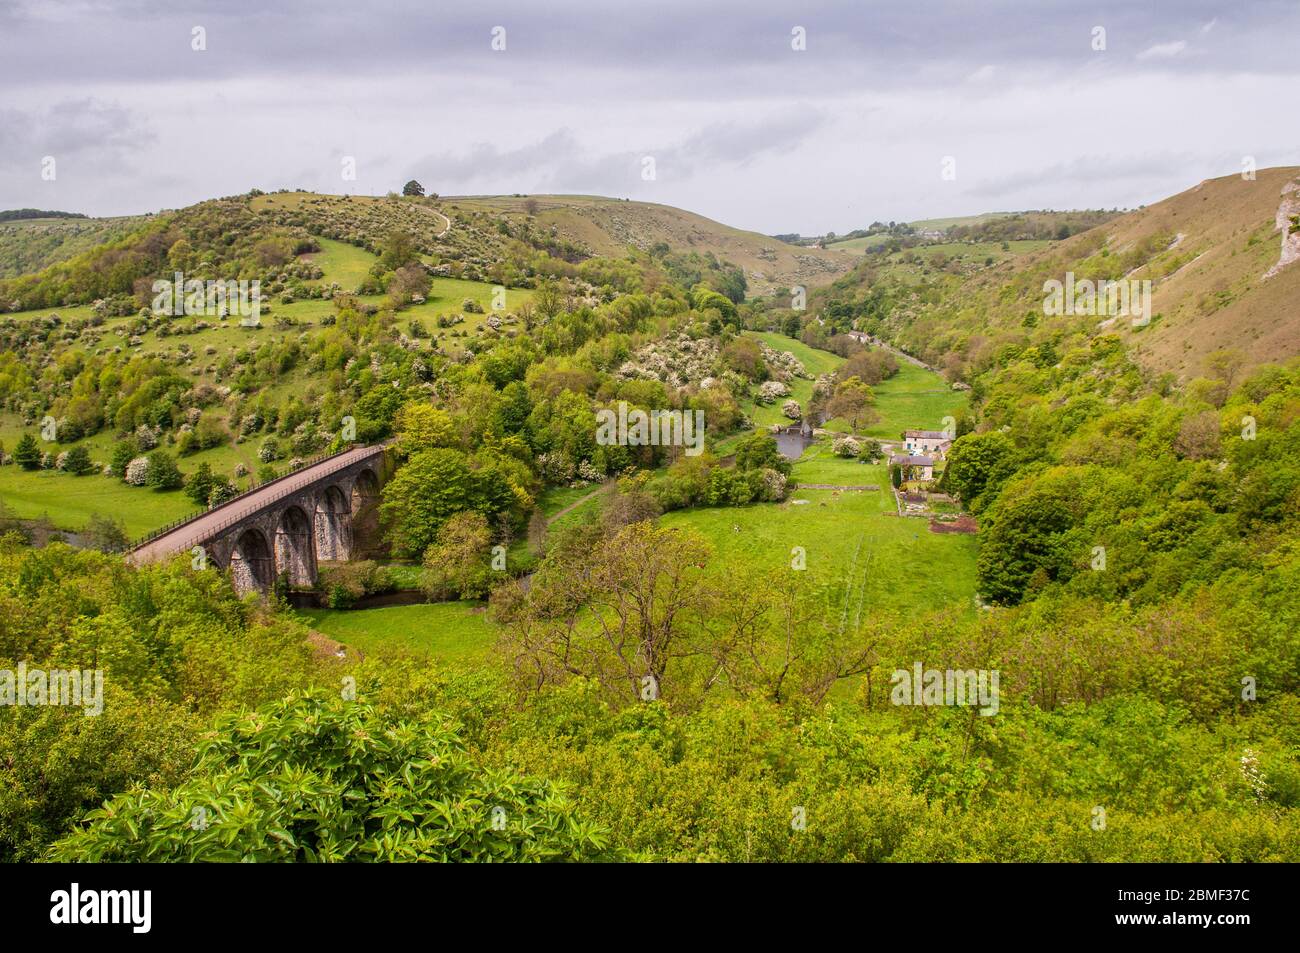 The Midland Railway's Headstone Viaduct, now part of the National Cycle Network's Monsal Trail, crosses Monsal Dale valley in the Derbyshire Peak Dist Stock Photo